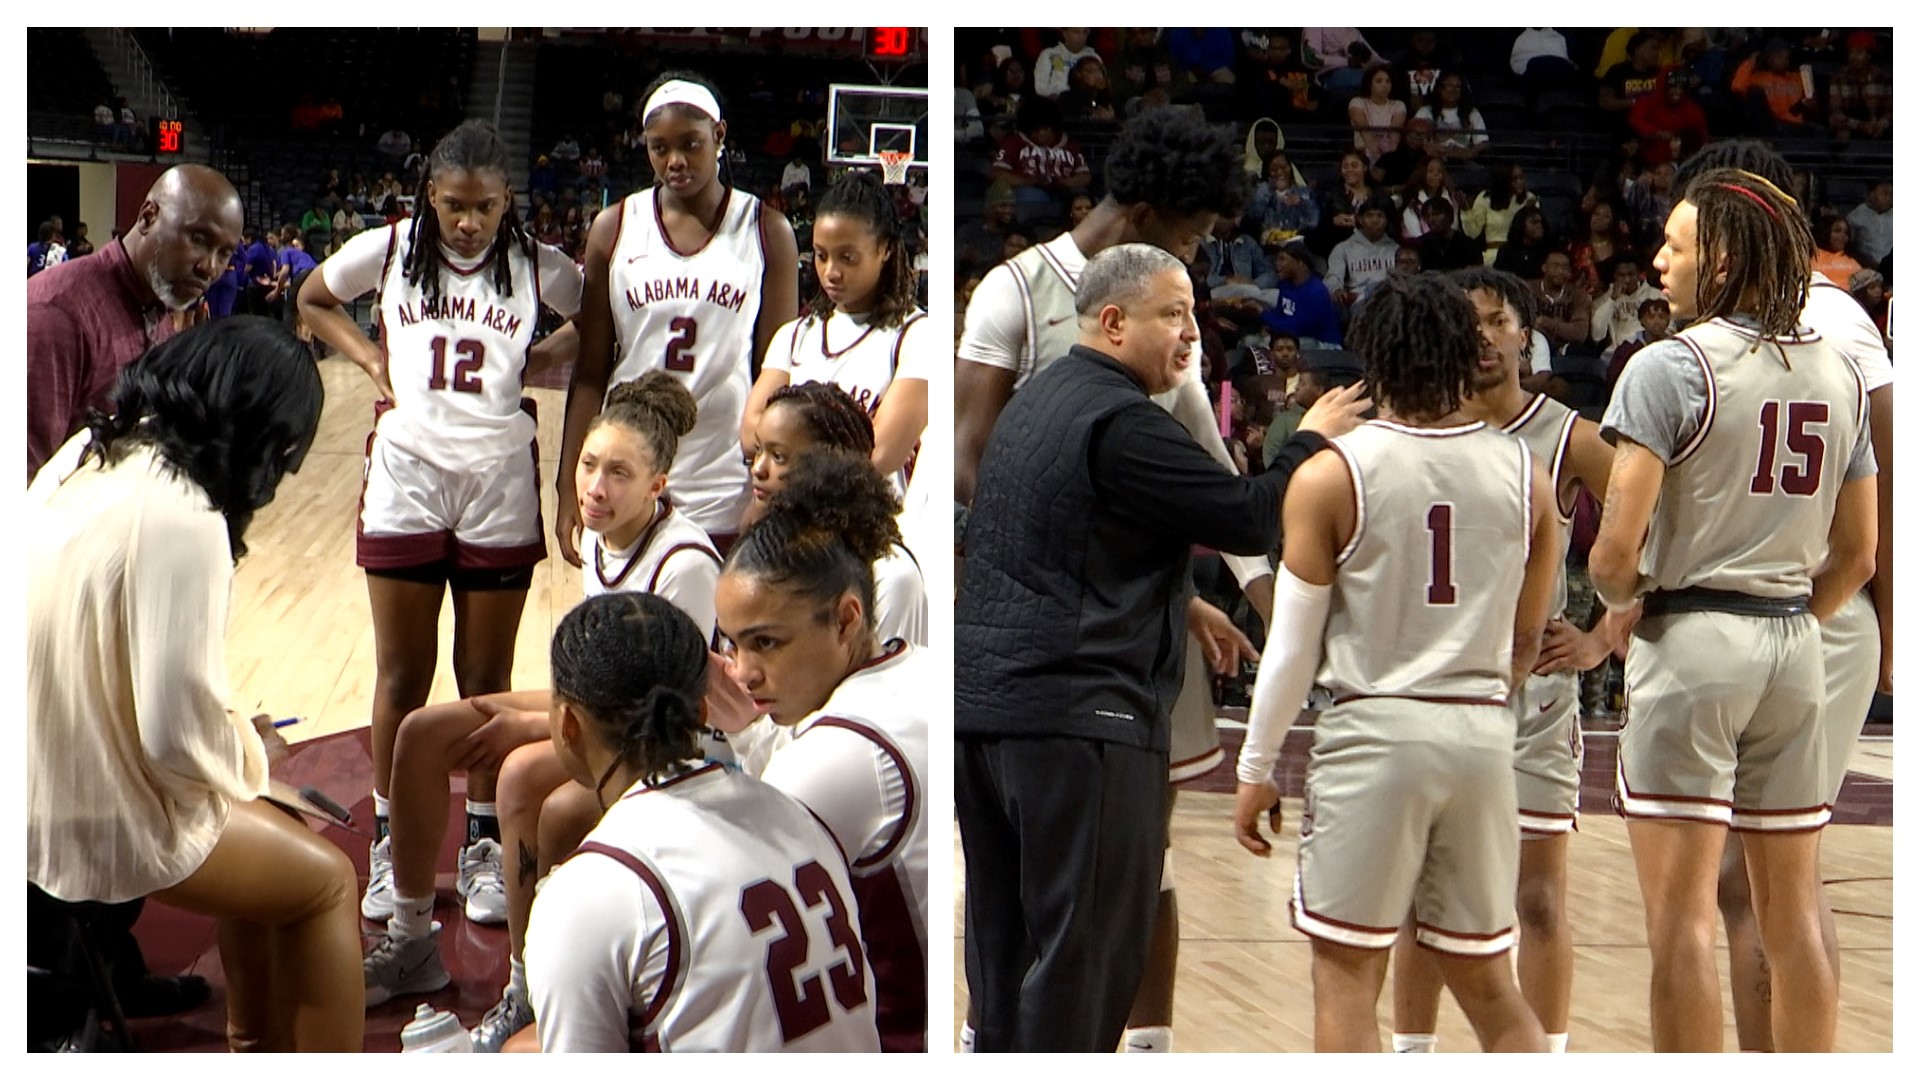 The Alabama A&M women's  earned their third straight win after defeating Prairie View A&M, 66-55. The men jumped out to a ten point lead en route to 66-57 win